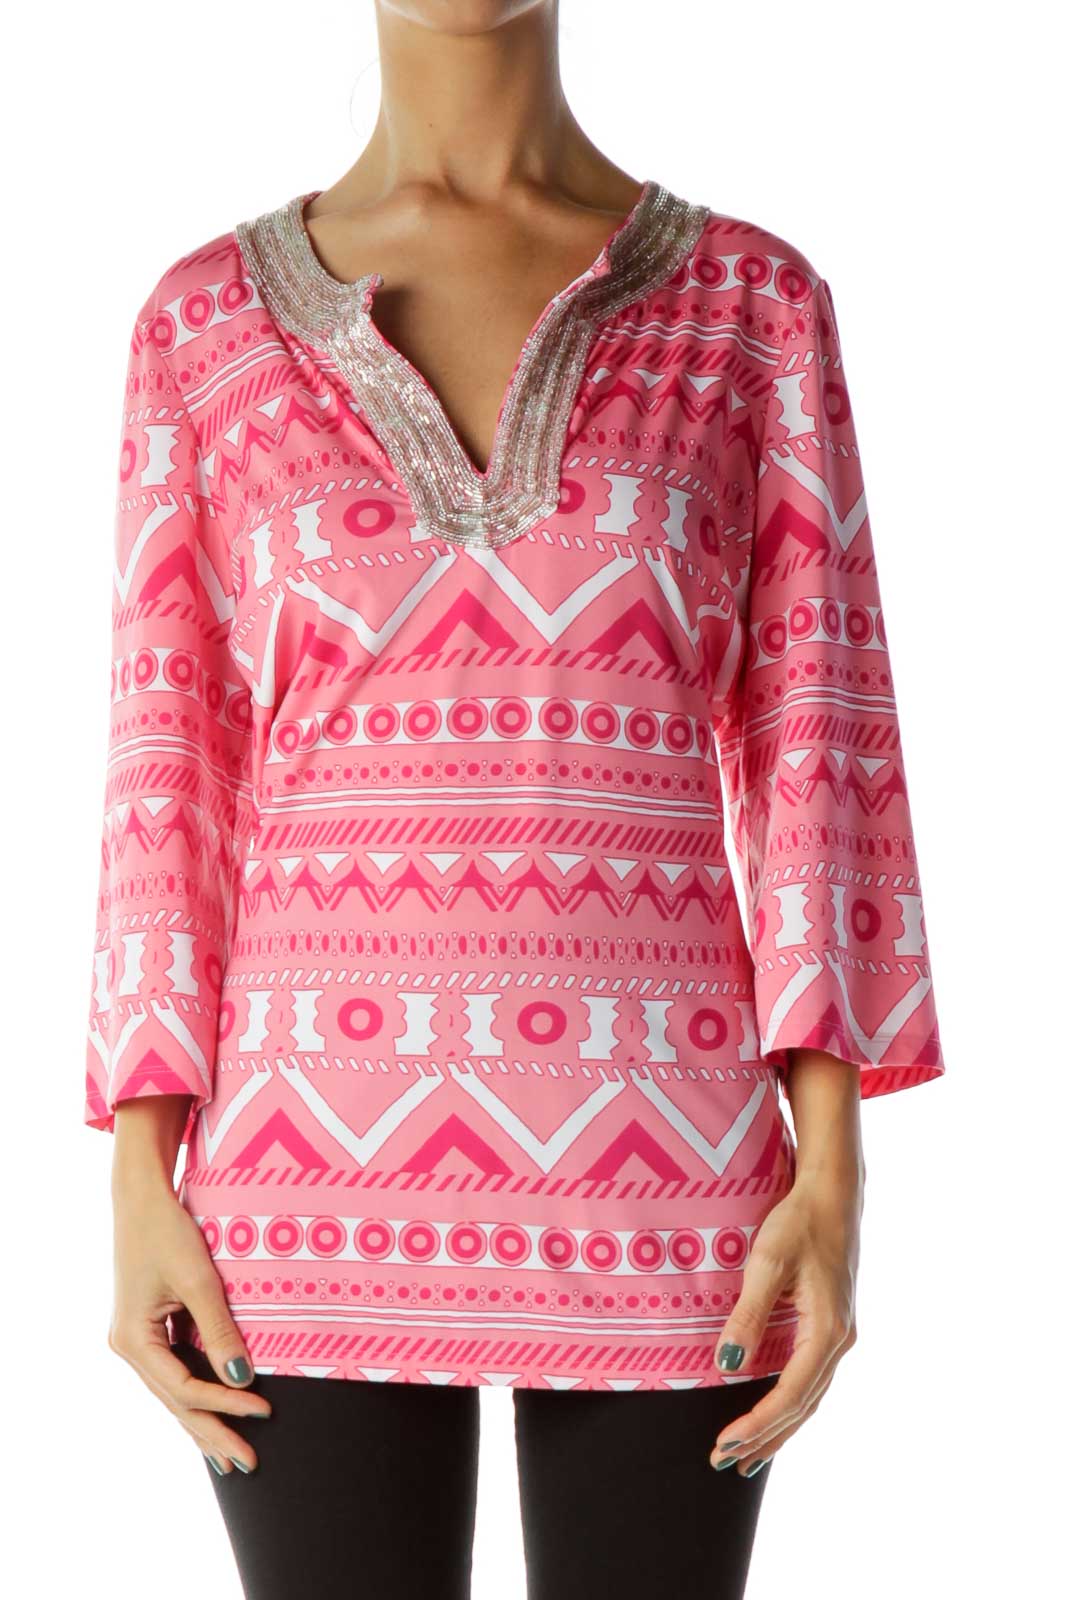 Pink Beaded Aztec Print Blouse Front